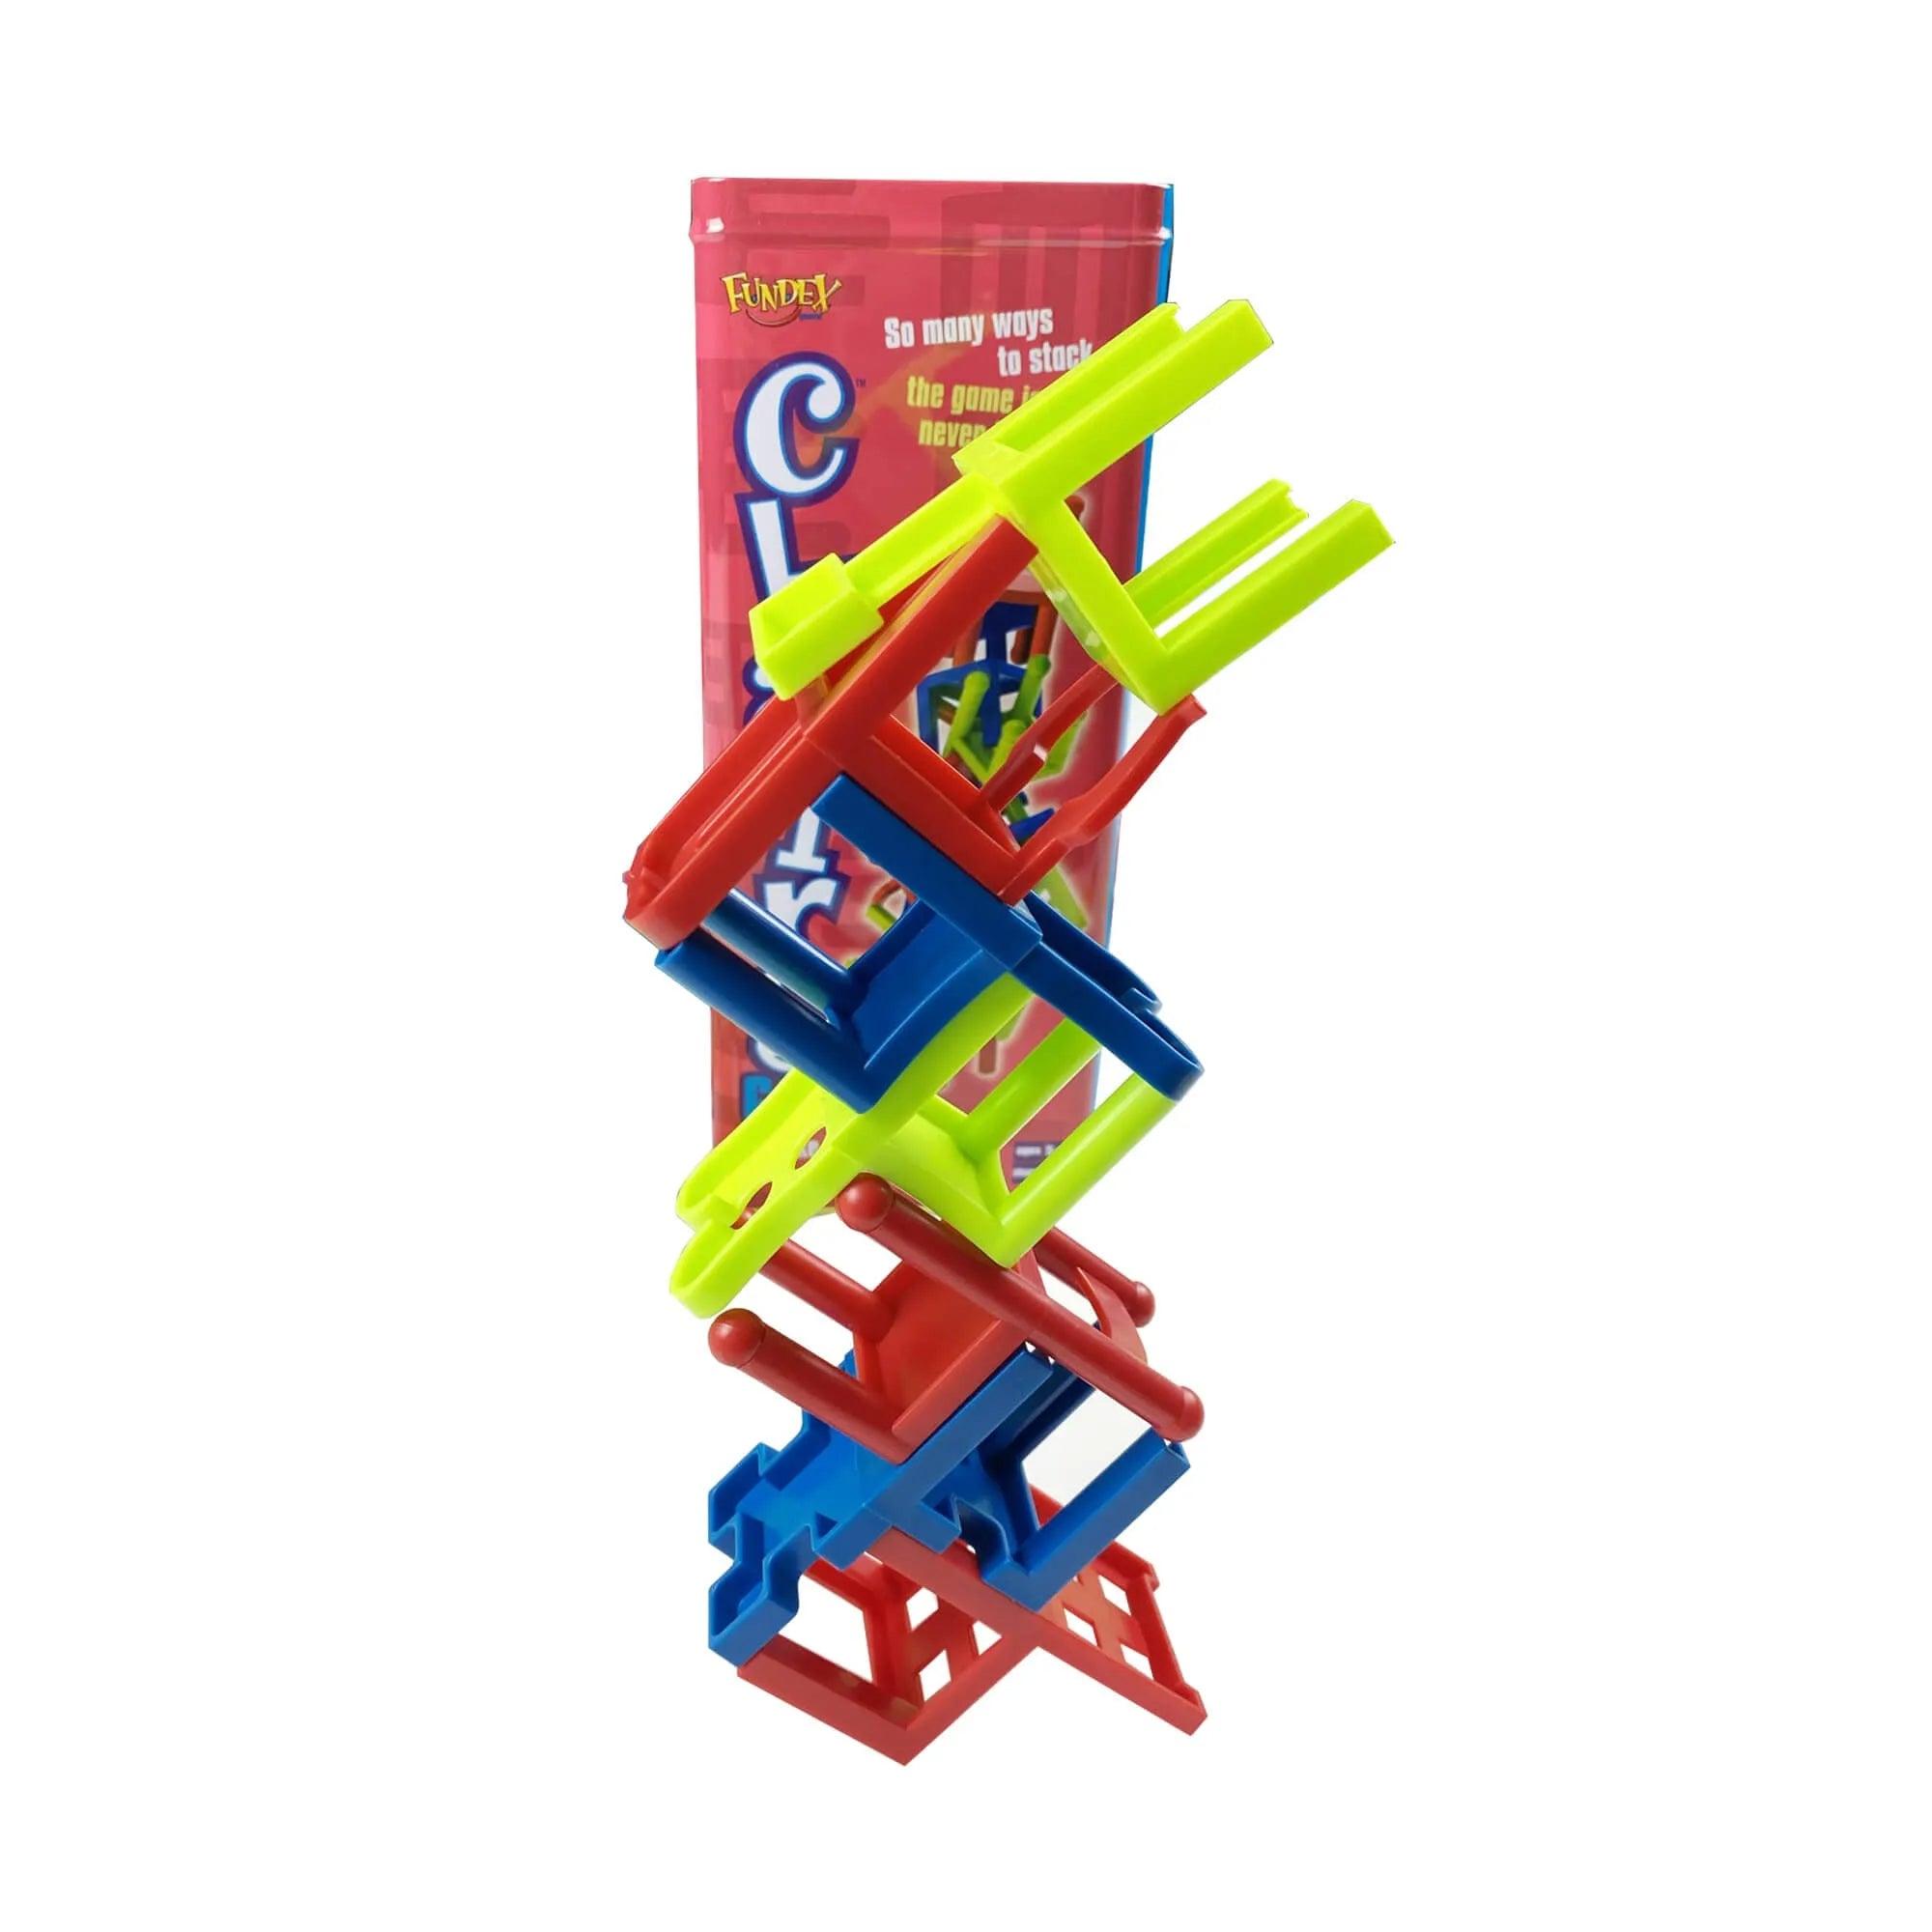 chairs stacking game from university games - shop toys for creativity at The Toy Room